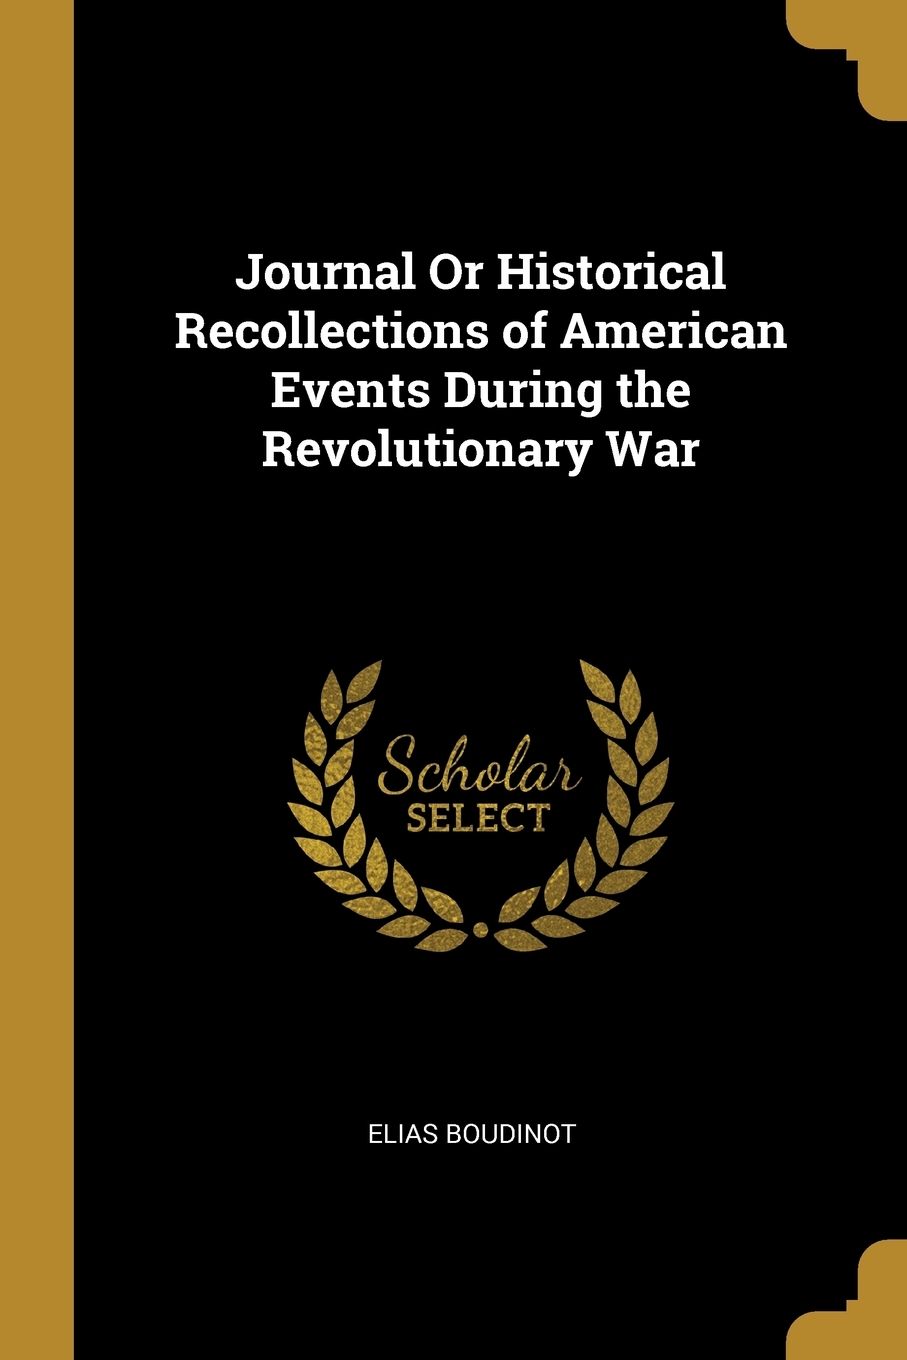 Journal Or Historical Recollections of American Events During the Revolutionary War